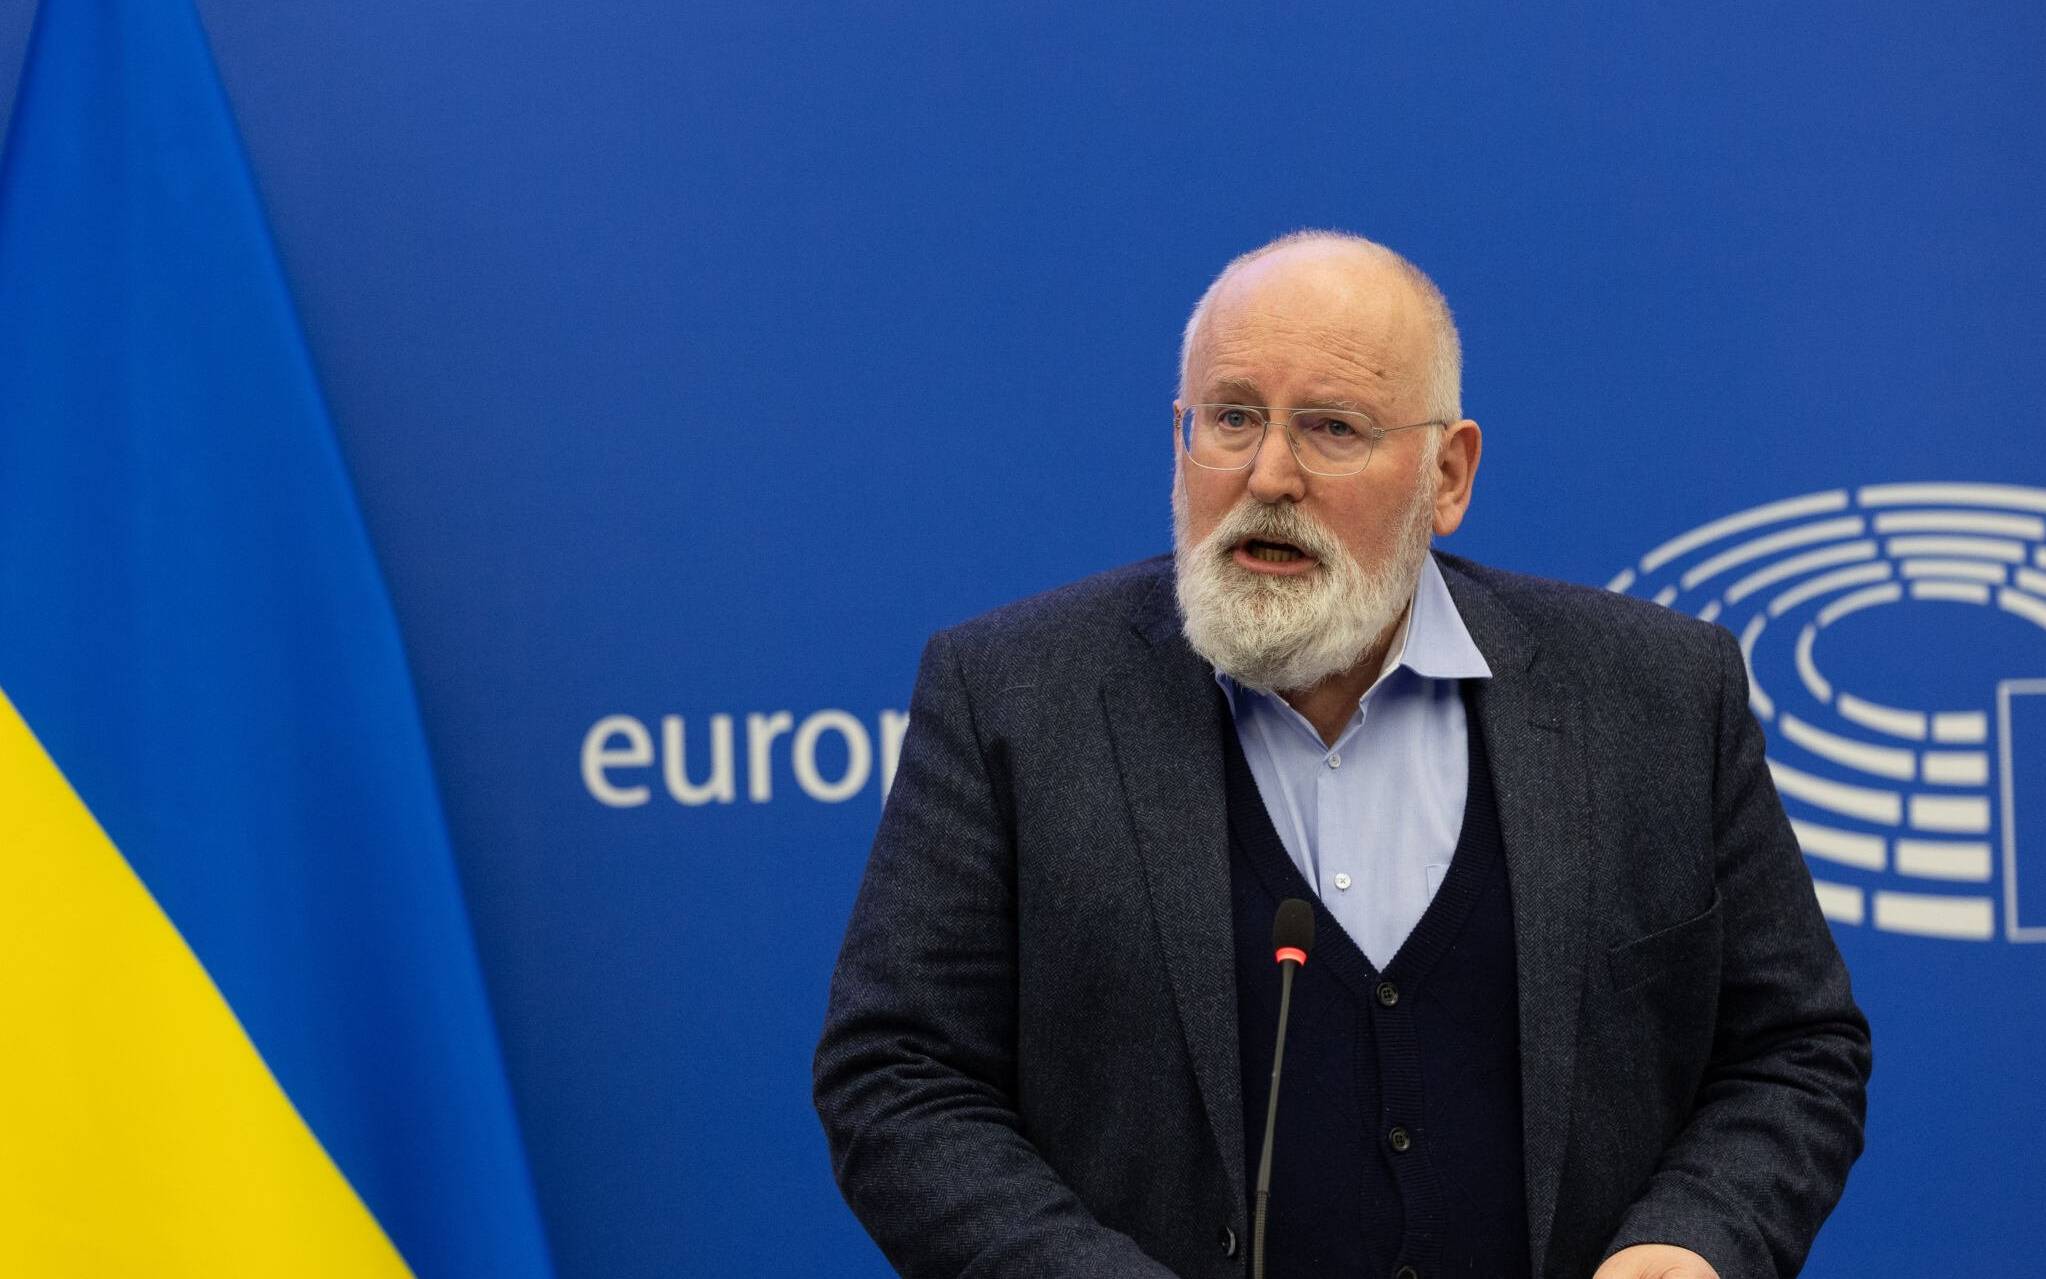 Read-out of the College meeting/press conference by Executive Vice-President
Timmermans and Commissioner Simson on more affordable, secure and sustainable energy in the EU.